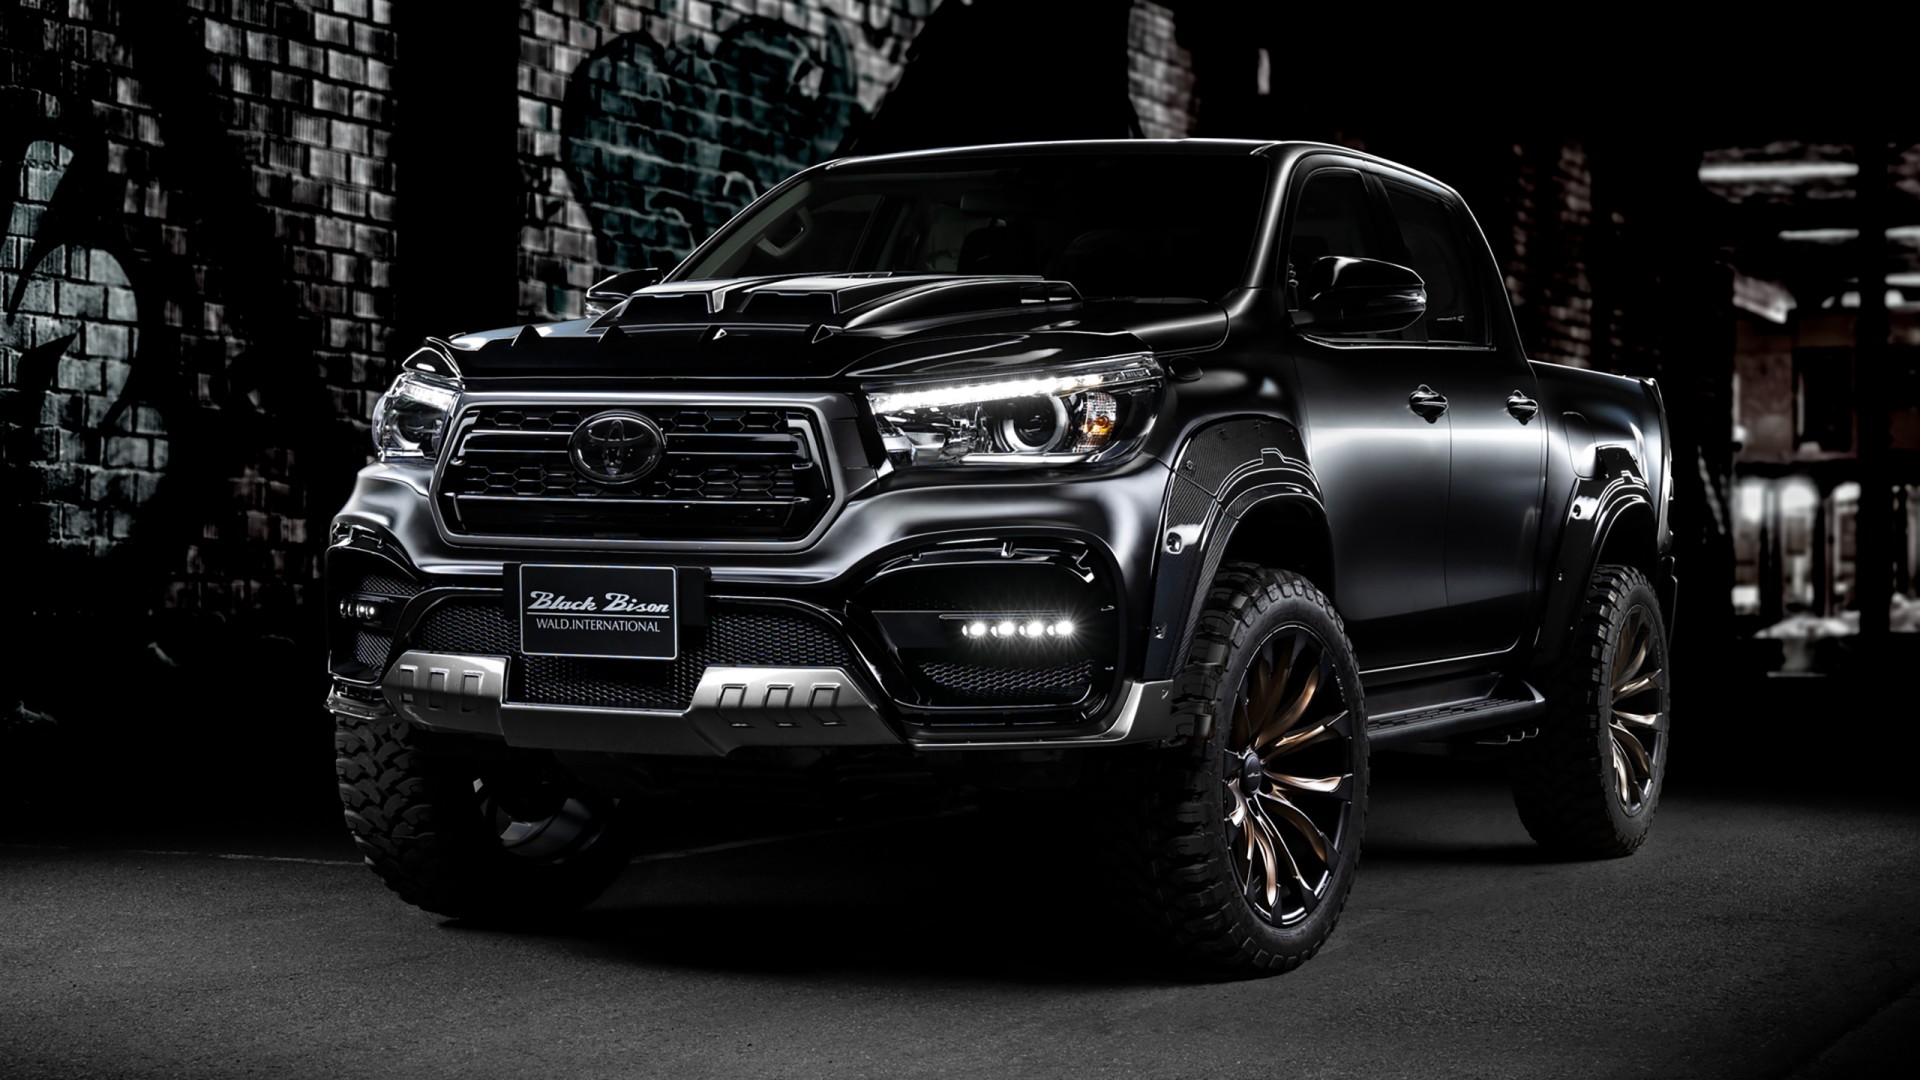 WALD Toyota Hilux Sports Line Black Bison Edition 2019 Wallpaper | HD Car Wallpapers